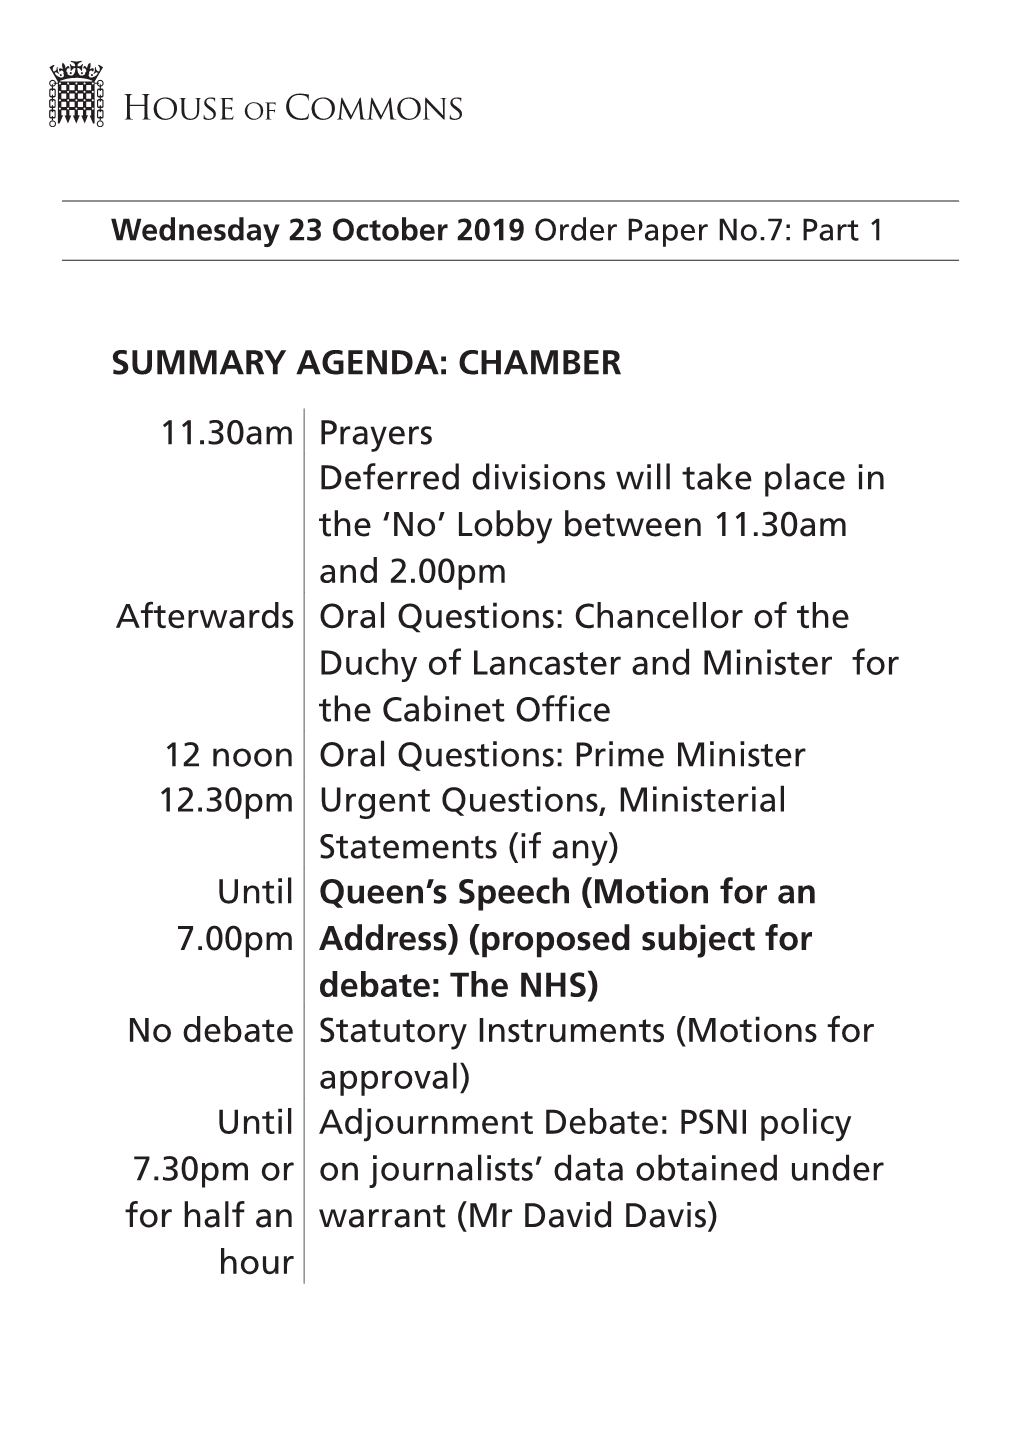 Order Paper for Wed 23 Oct 2019